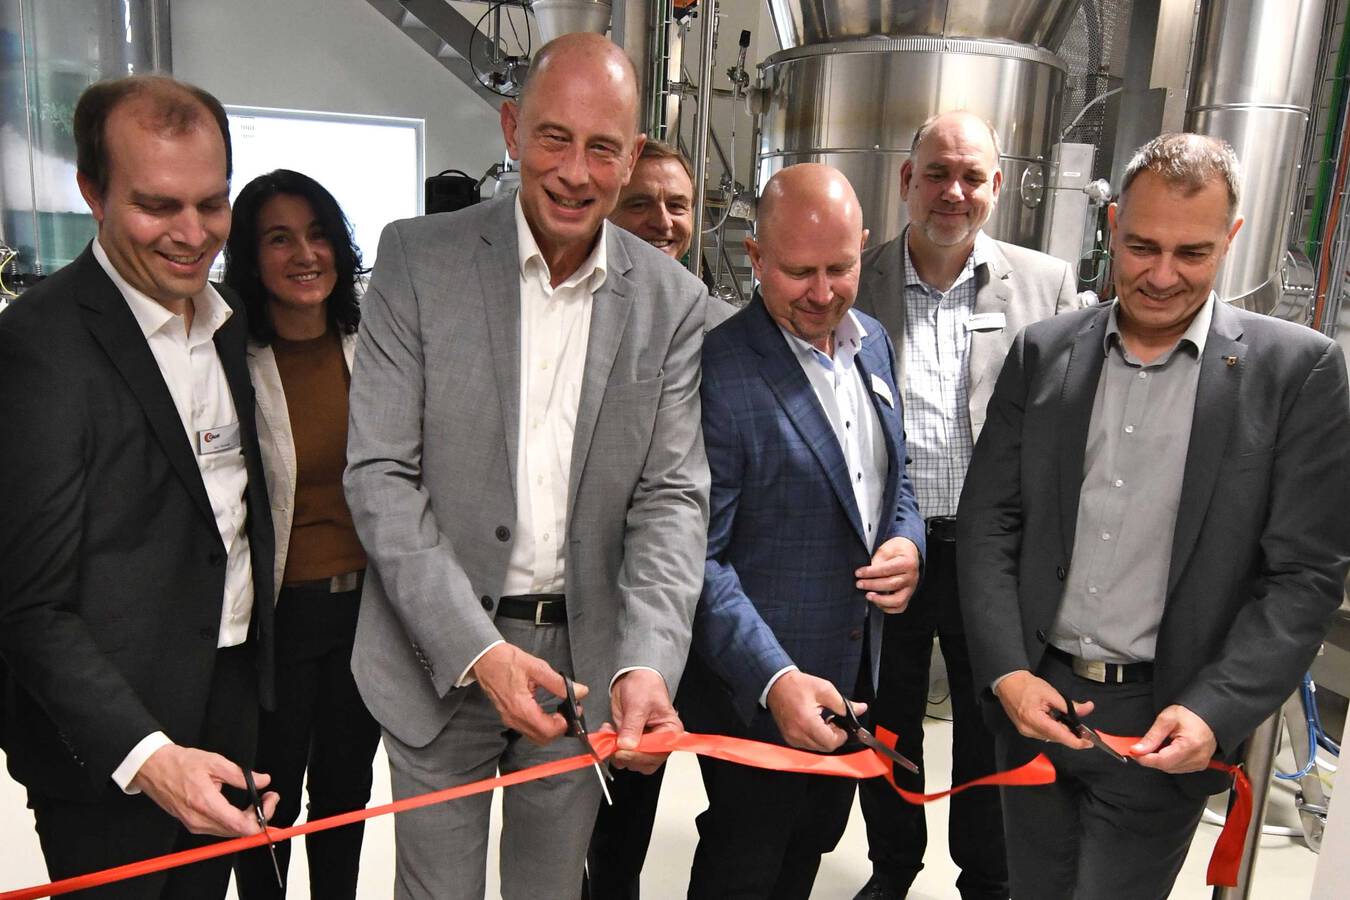 	 Festive inauguration of the Dryflux facility. The participants (from left to right): Jay Nowak, CEO Glatt Group, Economics Minister of Thuringia, Wolfgang Tiefensee (SPD) Jeff White, Head of the Surface Solutions business unit within the Electronics bus